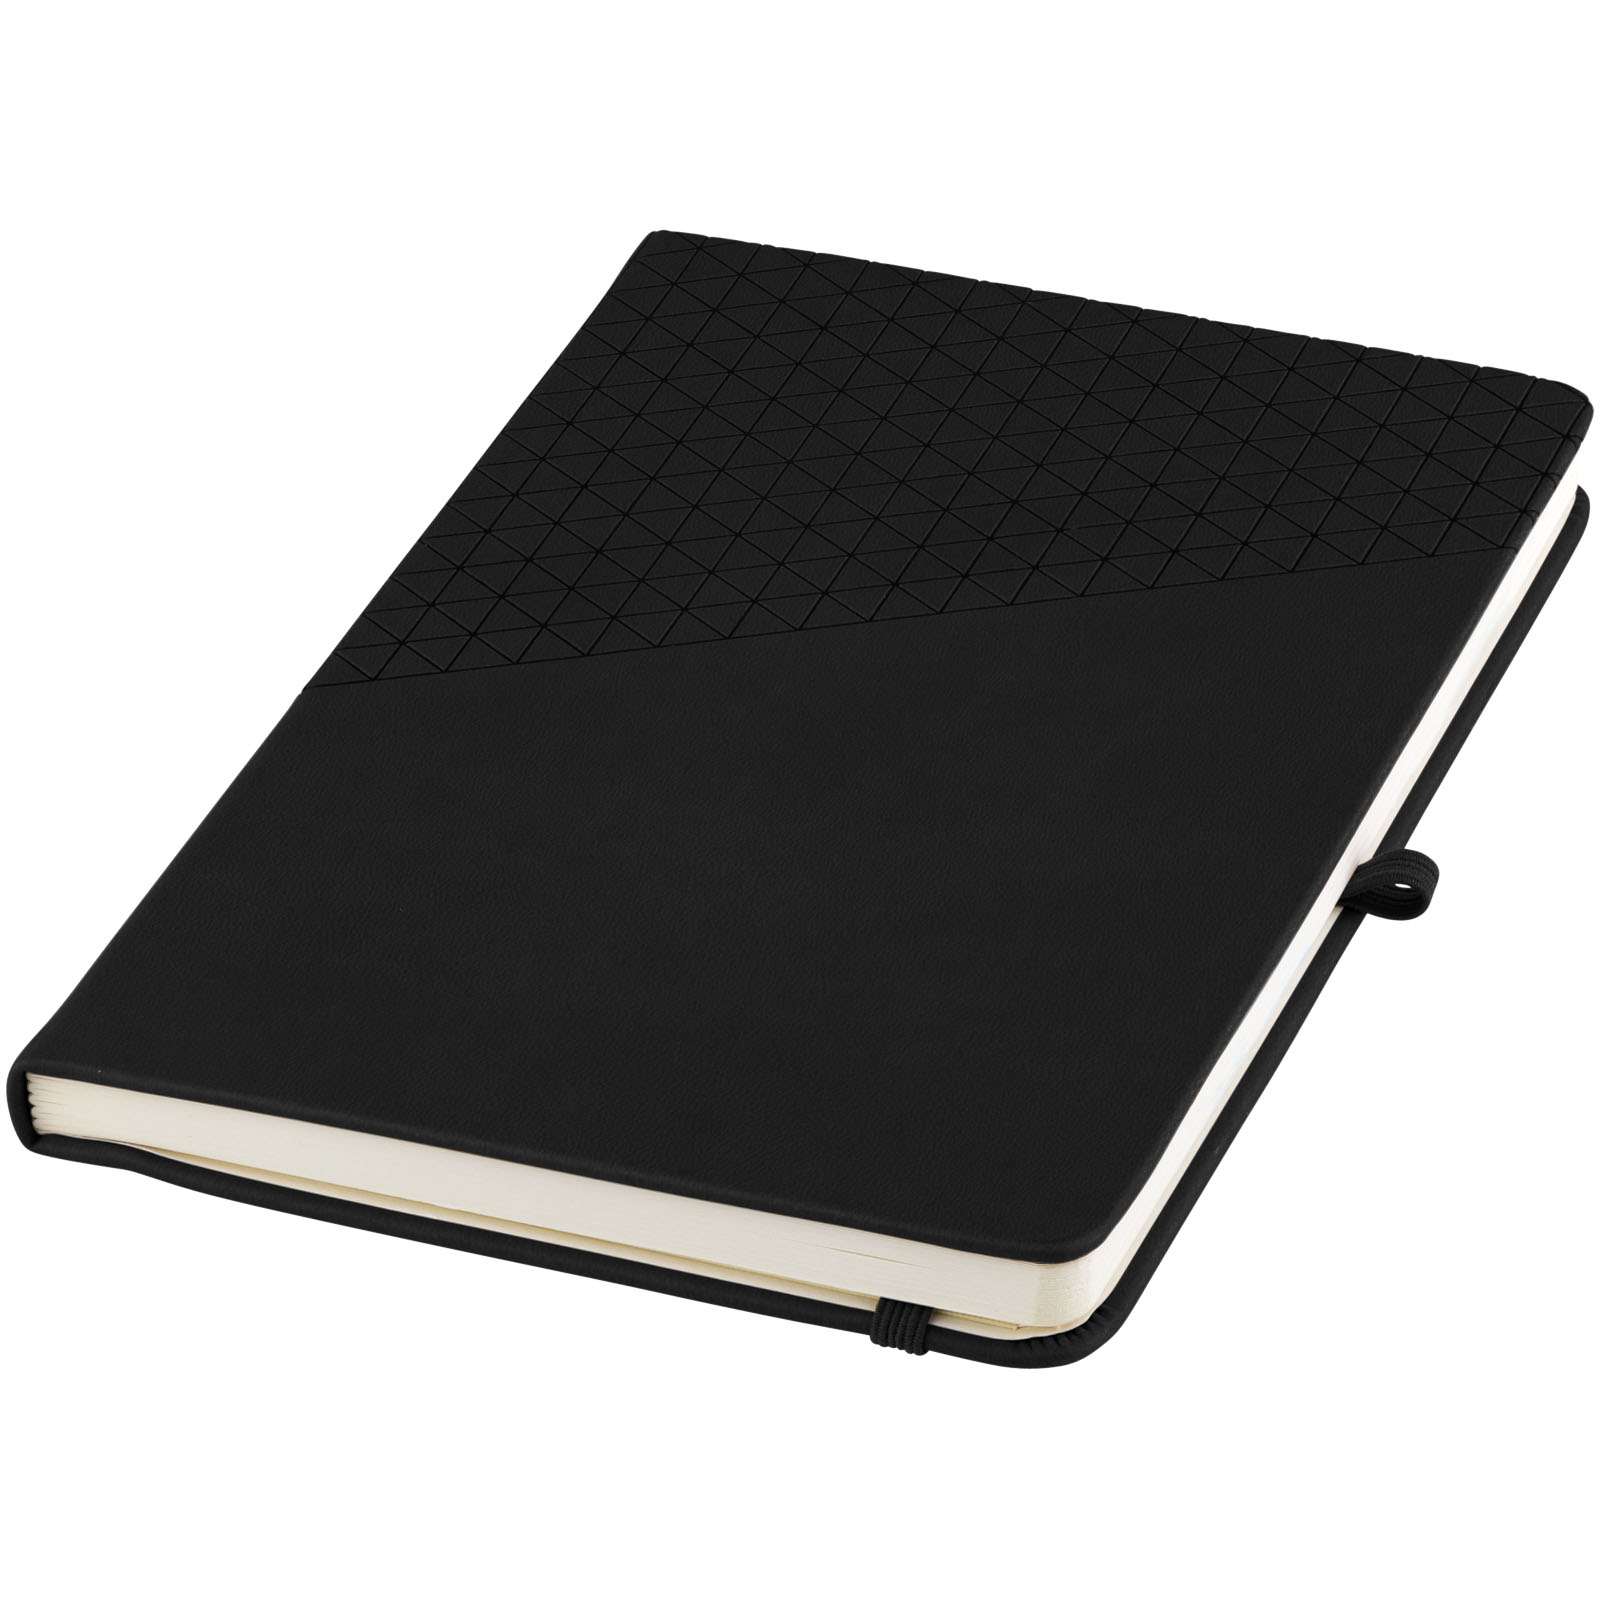 Hard cover notebooks - Theta A5 hard cover notebook